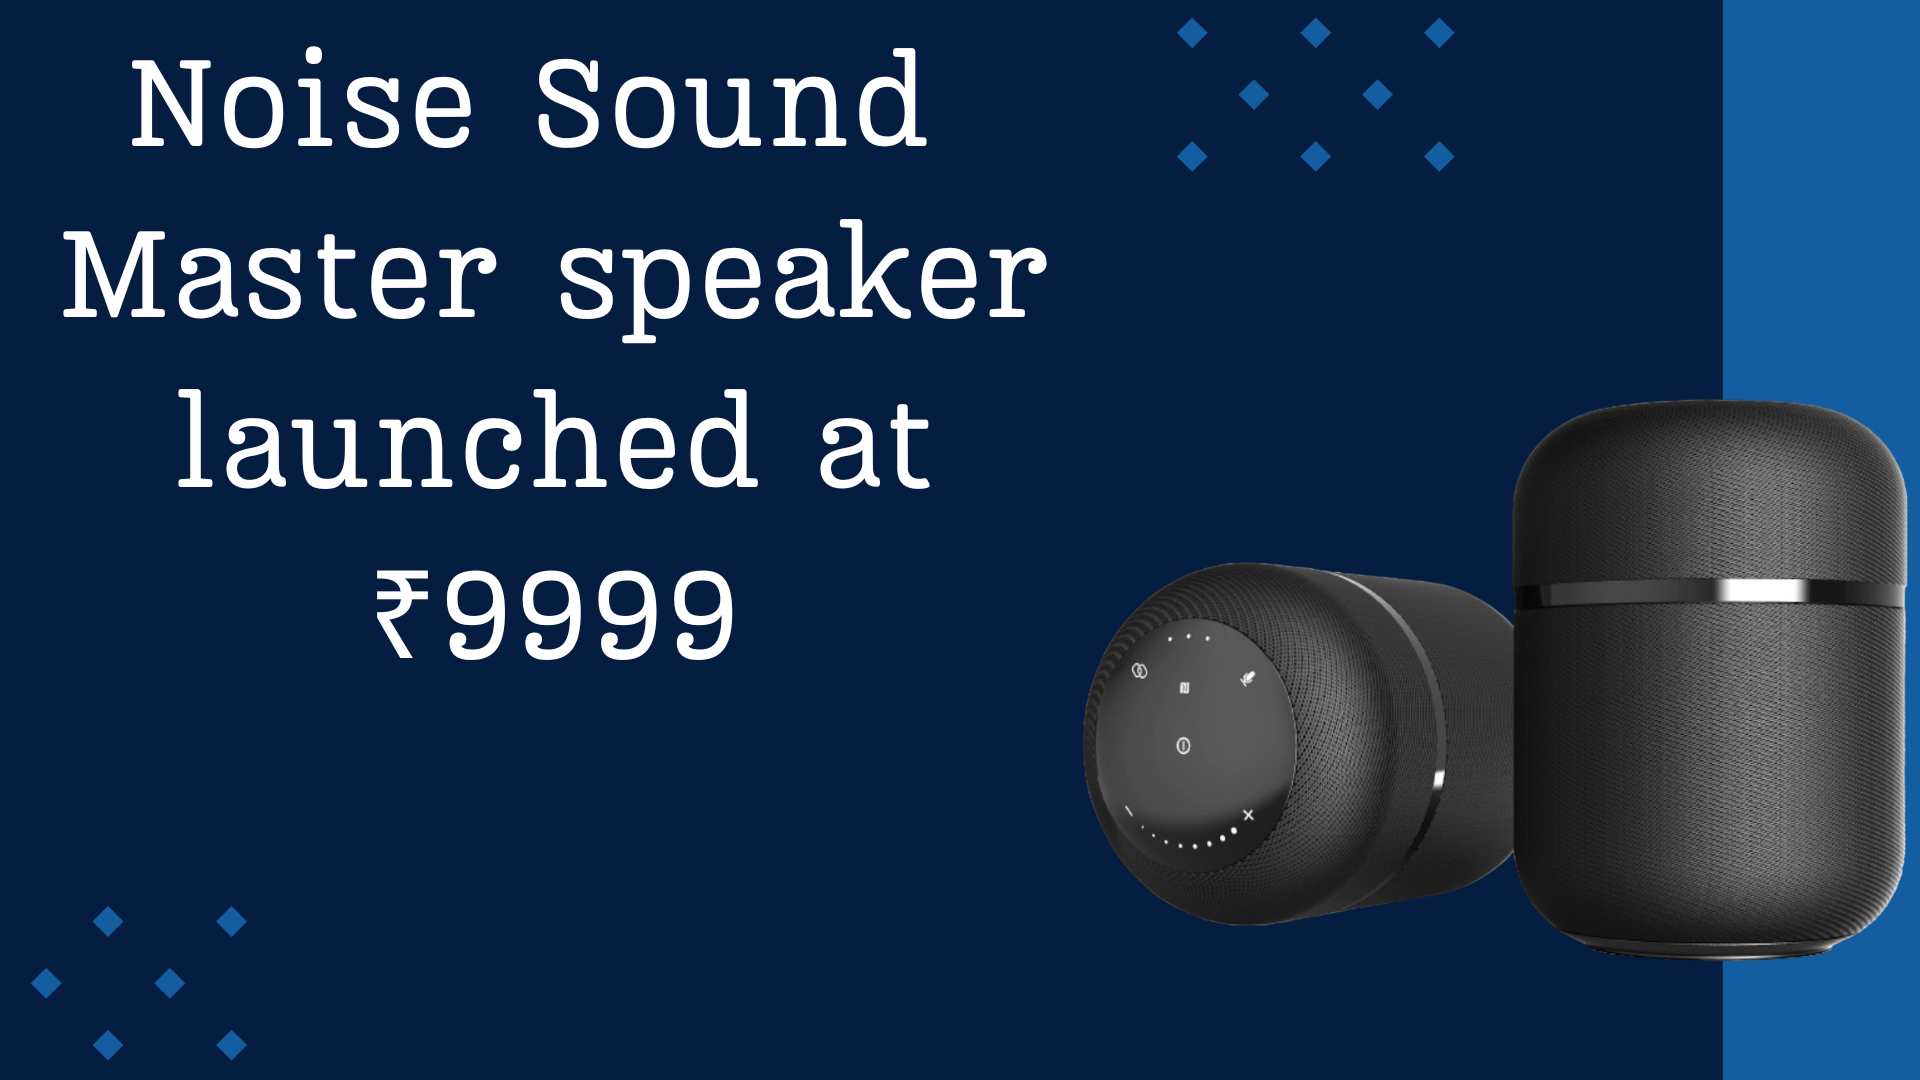 Noise Sound Master speaker launched at ₹9999